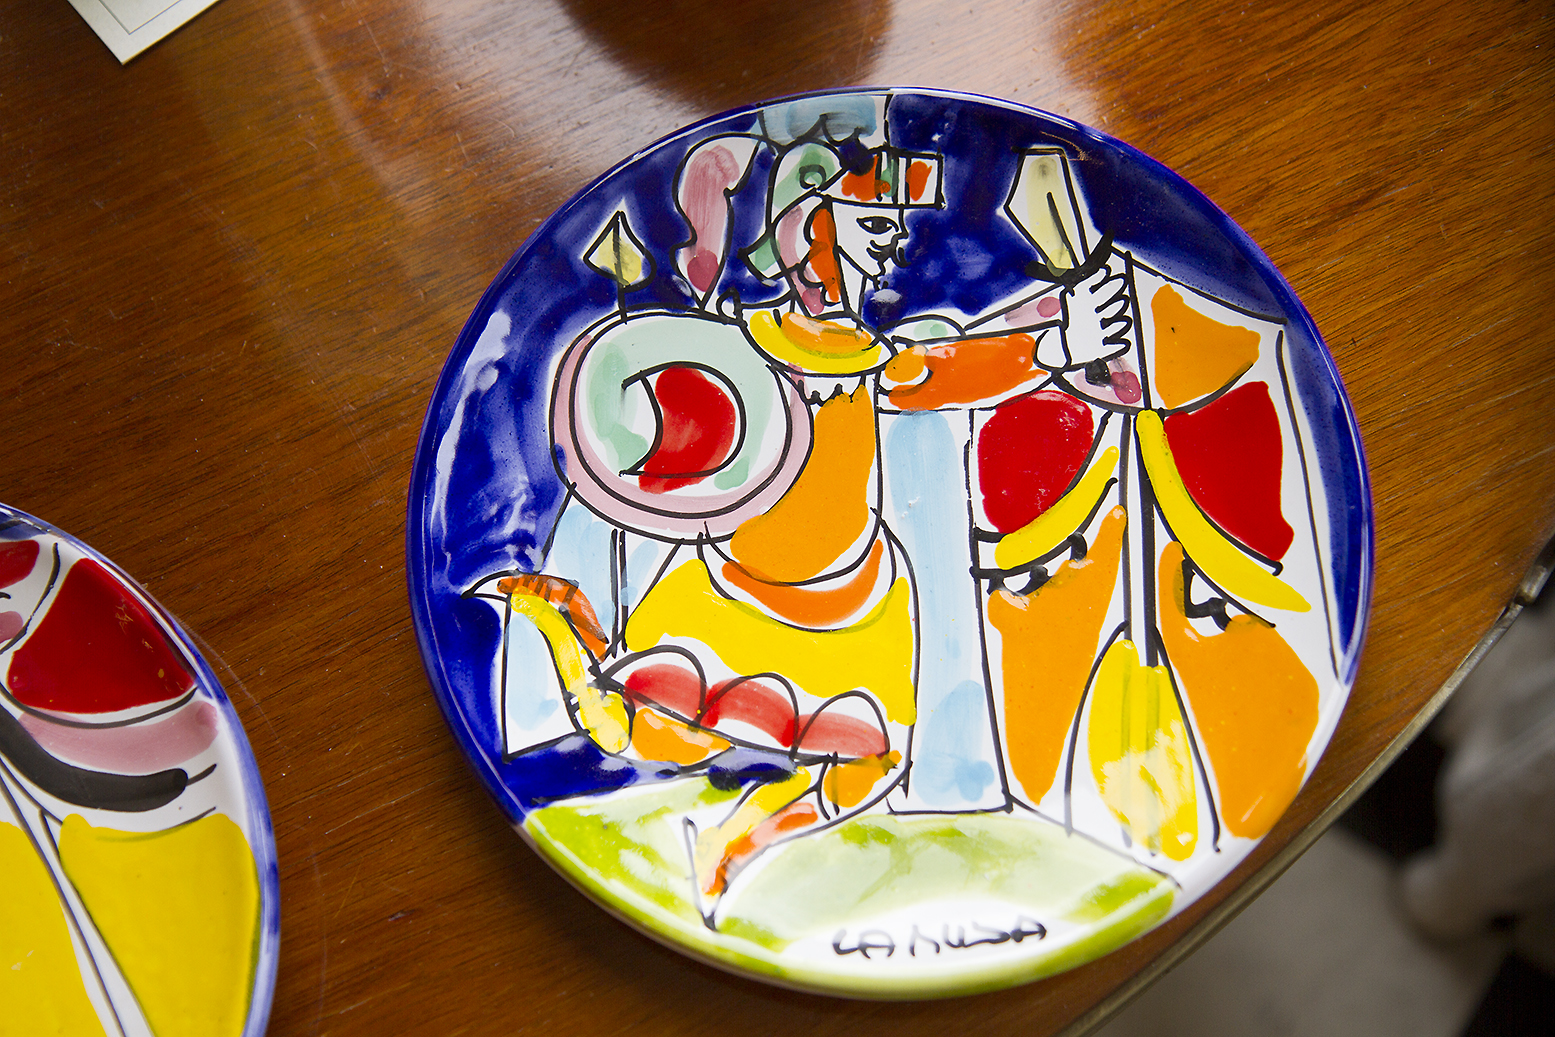 $145 Vintage signed La Musa plate hand painted by Giovanni DeSimone and influenced by Picasso under whom he studied. Circa 1960 1/2